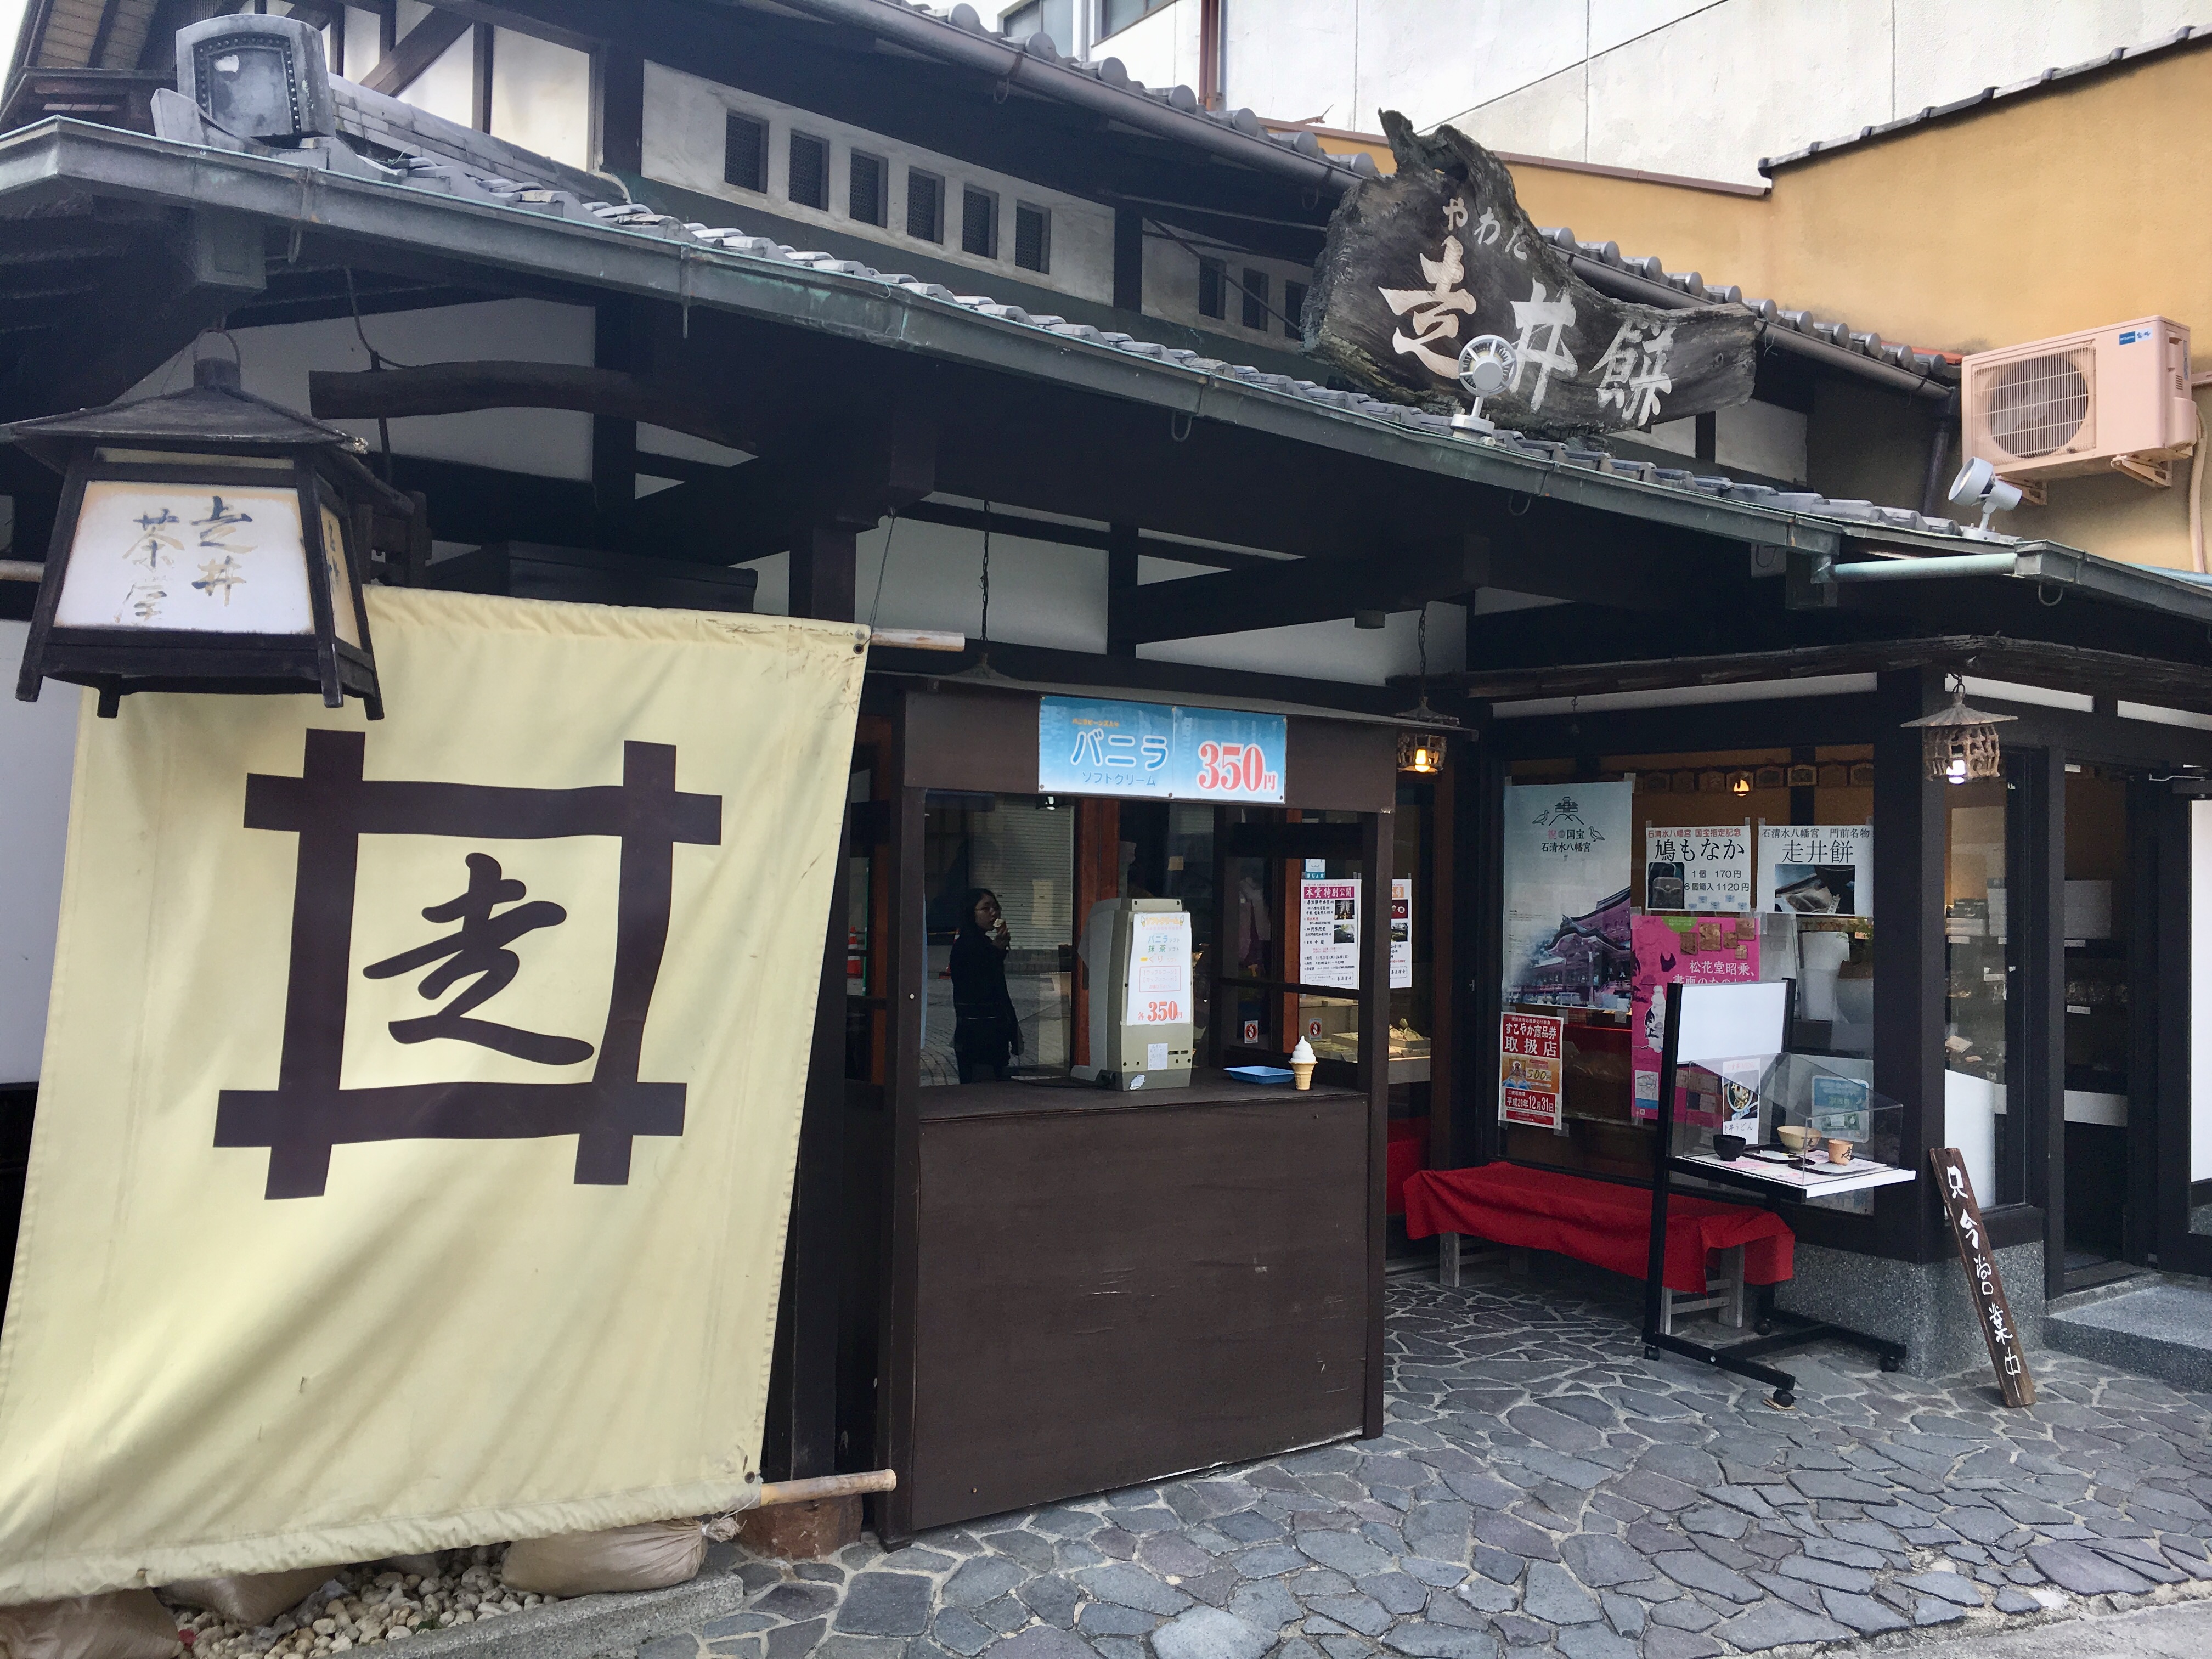 old fashioned Japanese restaurant with dark wood fixtures and large cloth sign 